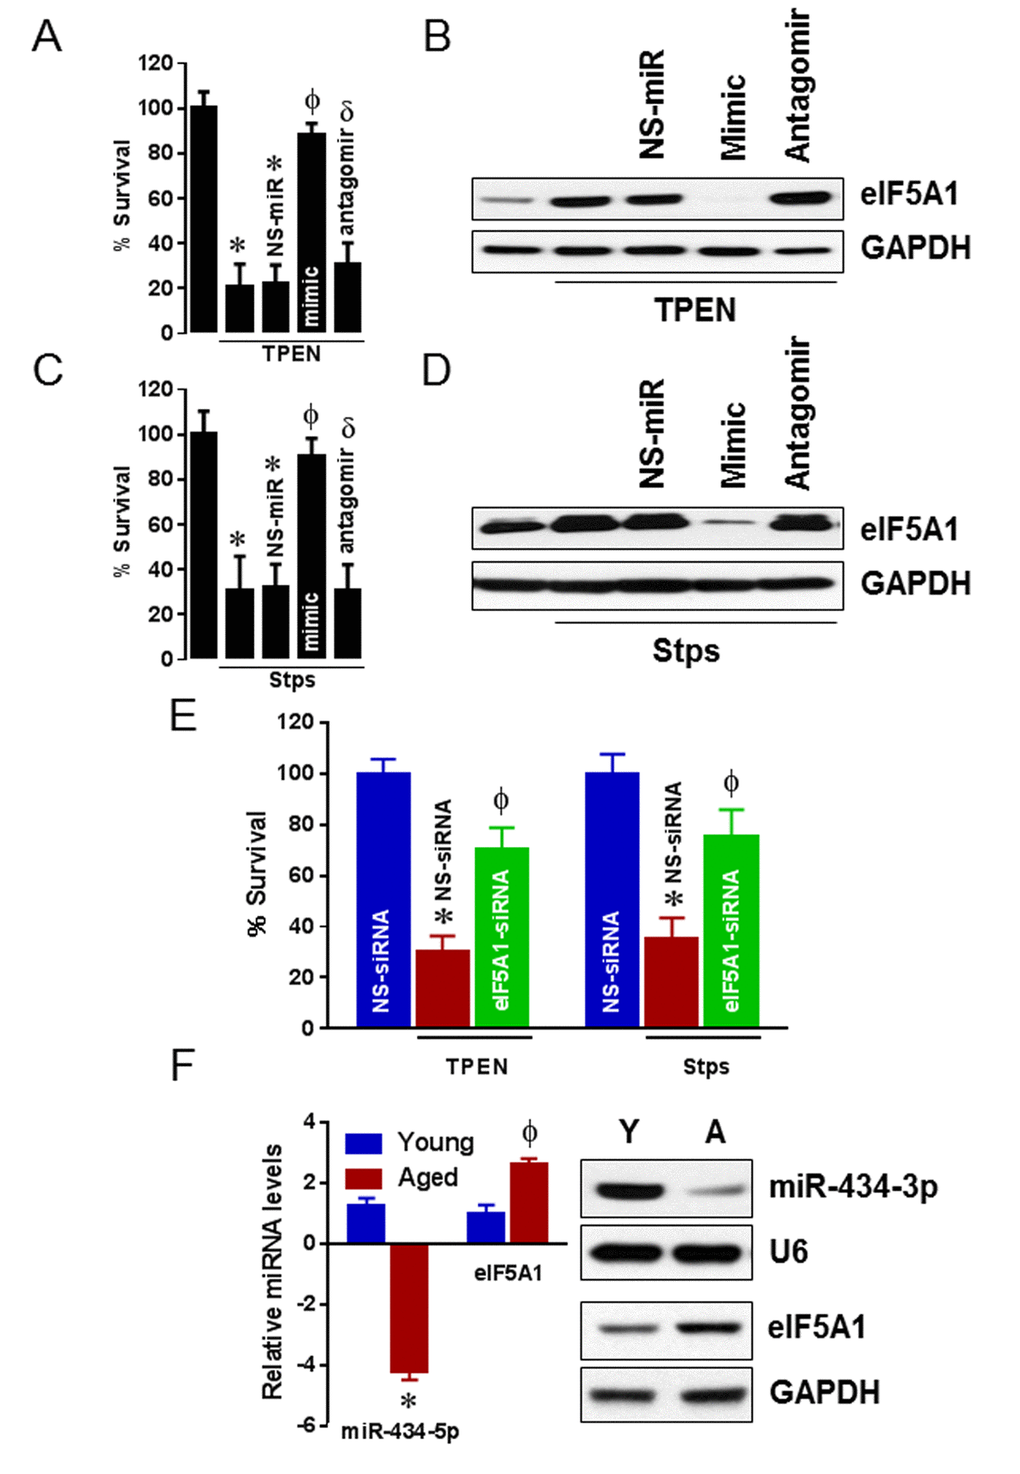 miR-434-3p protects apoptosis through eIF5A1. Myotubes were transfected with NS-mimetic, miR-434-3p mimetic with or without miR-434-3p antagomir or no transfection for 24 h followed by eight hours TPEN (100 μM) or Stps (1 μM) incubation. (A and B) Apoptosis (%) was measured by MTT assay in TPEN treated and non-treated myotubes (A) and the expression of eIF5A1 protein levels were determined by western blot (B). (C and D) Apoptosis (%) was measured by MTT assay in Stps treated and non-treated myotubes (C) and the expression of eIF5A1 protein levels were determined by western blot (D). (E) Myotubes were transfected with non-specific siRNA (NS-siRNA) or eIF5A1 siRNA for 24 h followed by eight hours TPEN (100 μM) or Stps (1 μM) incubation. Apoptosis (%) was measured by MTT assay. (F) miR-434-3p and eIF5A1 levels in young and aging GA muscles were determined by solution hybridization and western blot methods, respectively. U6 and GAPDH were served as loading controls for miR-434-3p and eIF5A1, respectively. Gel pictures are representative of three independent experiments. Each bar indicates mean ± SEM (n = 3). *, p 